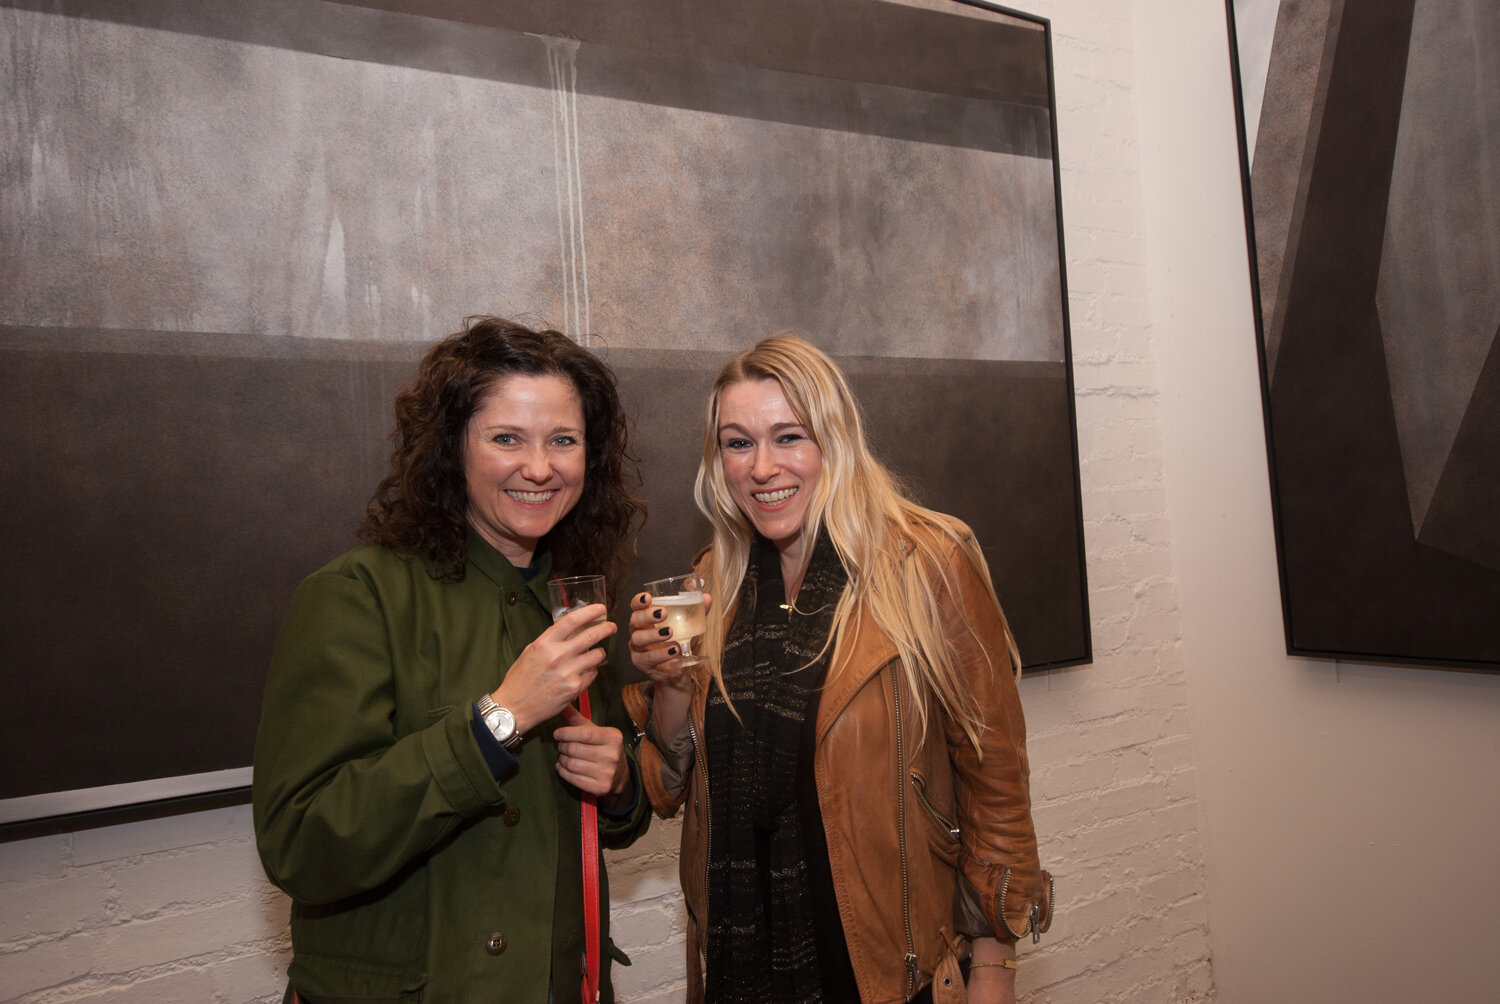 Launch night art preview exhibition photography. Pictorem gallery Robert William Jackson